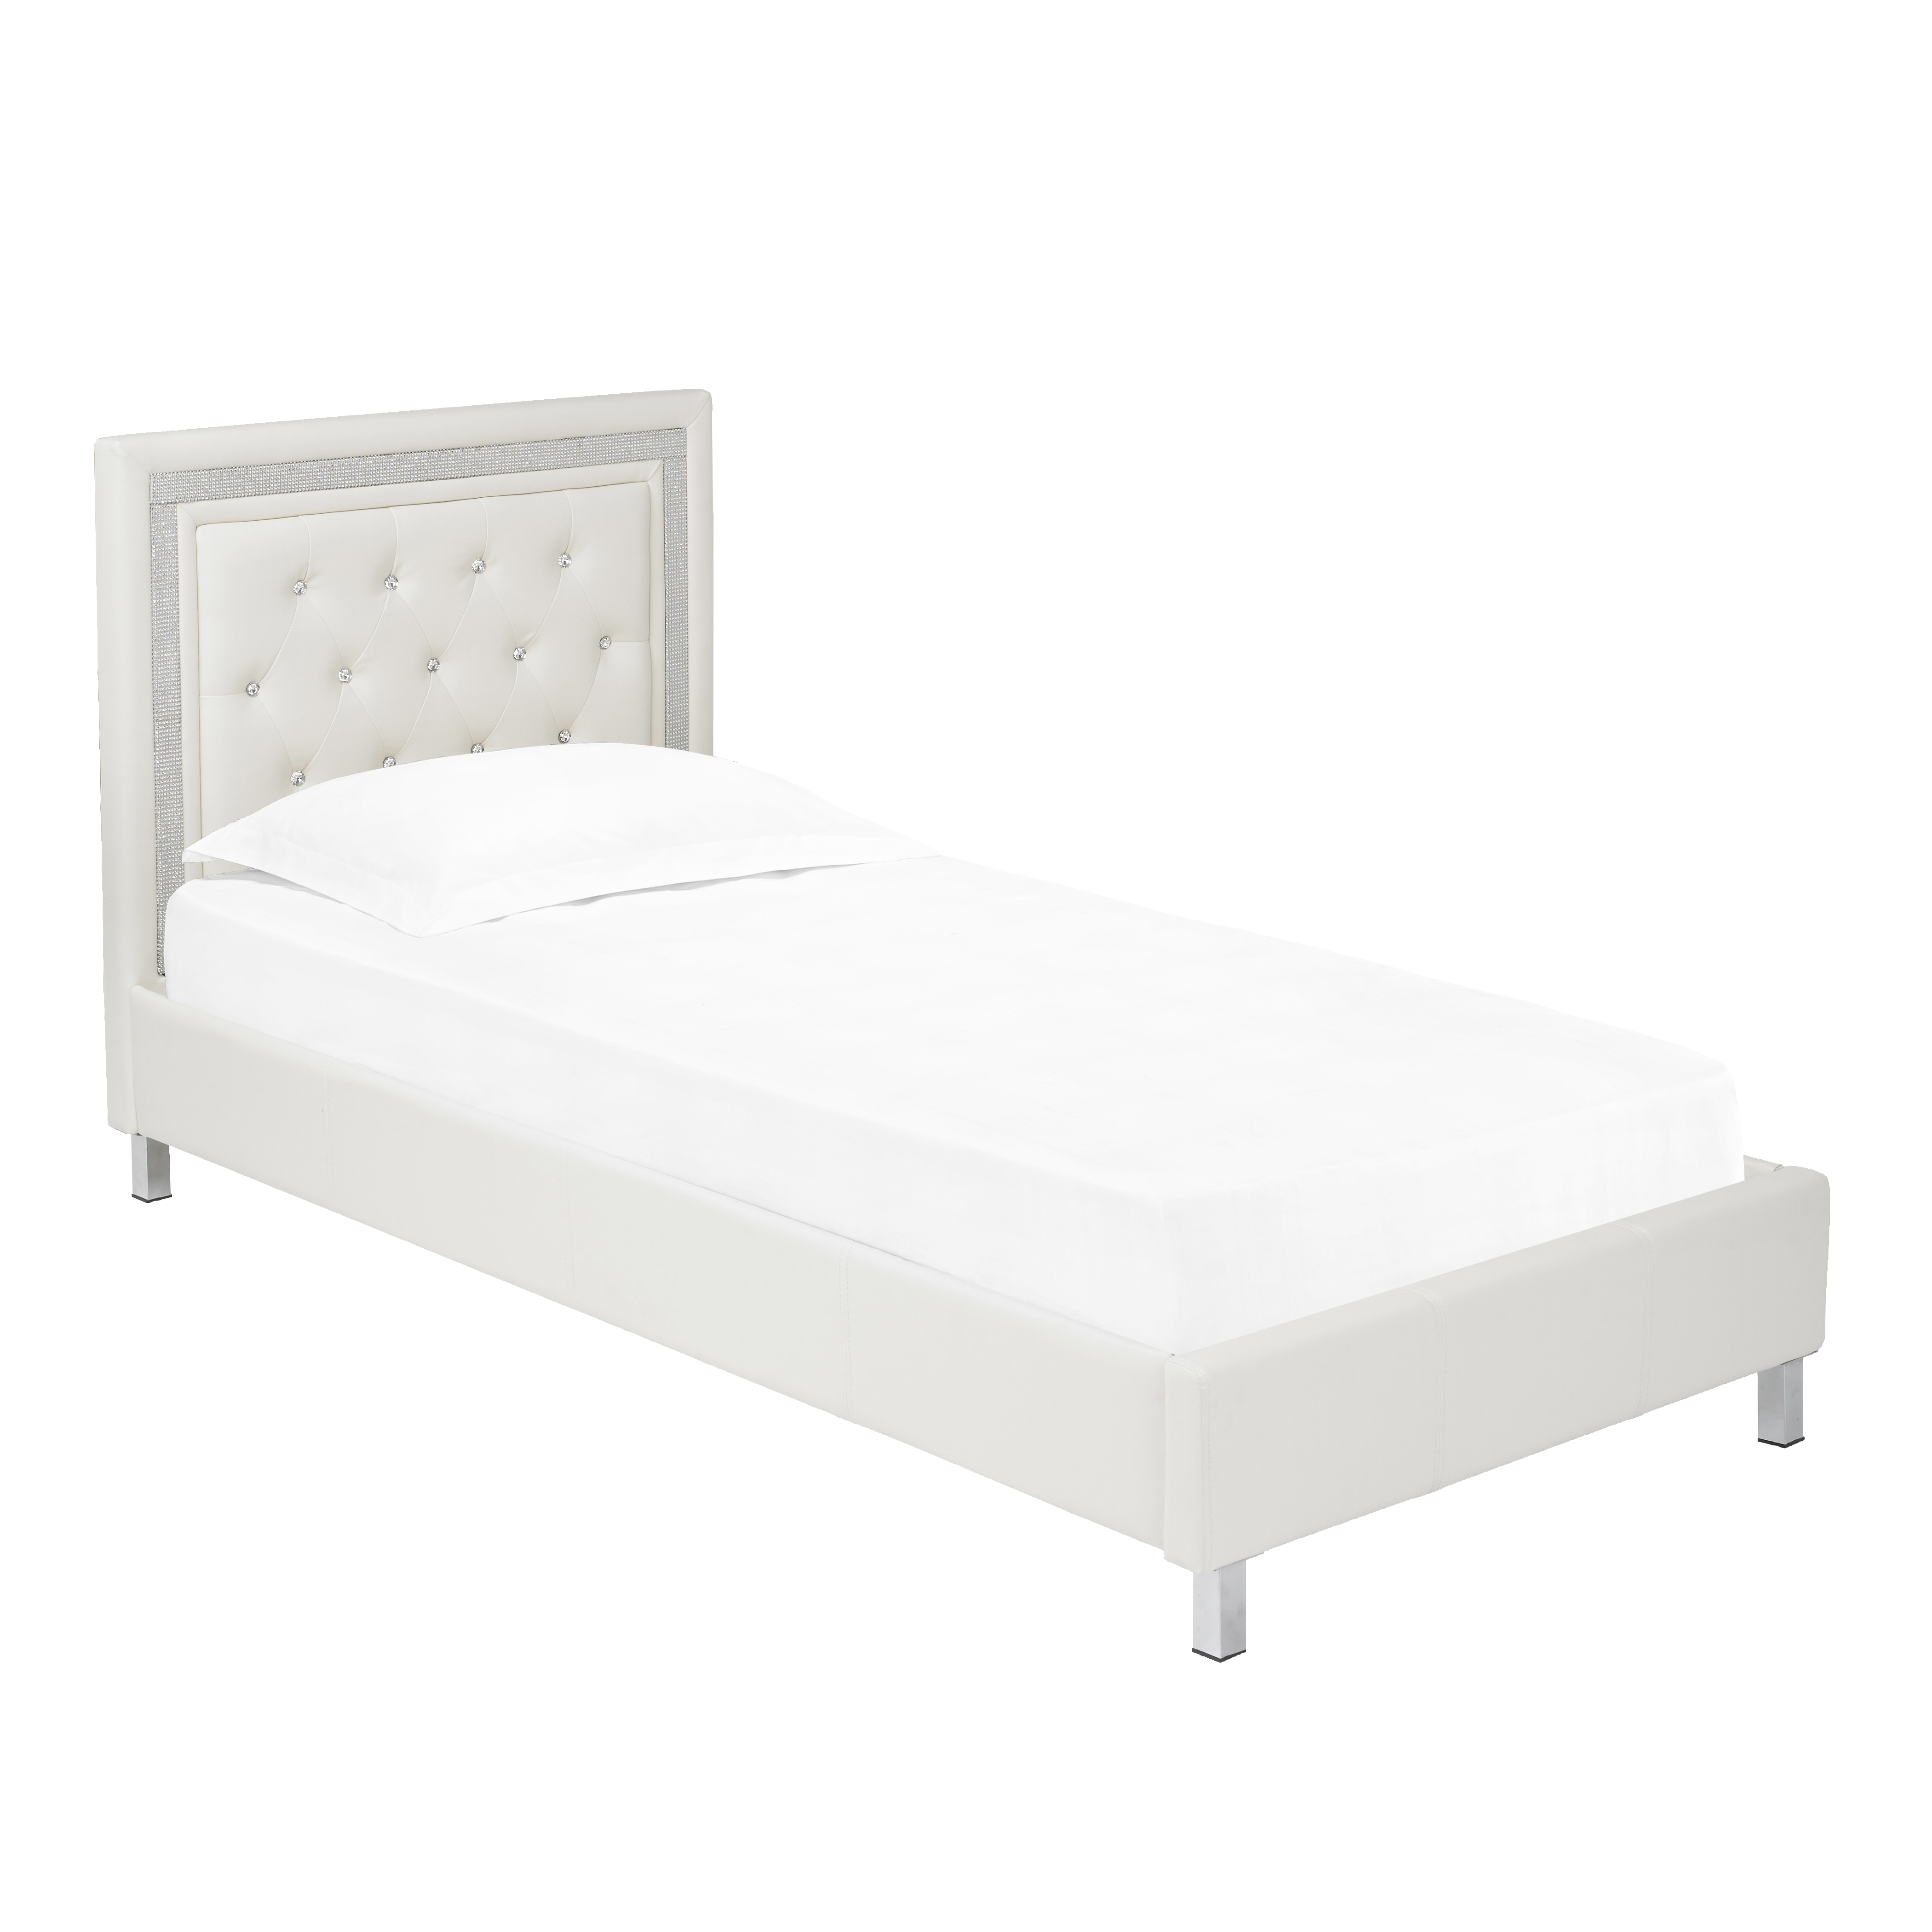 Crystalle 3.0 Single Bed White